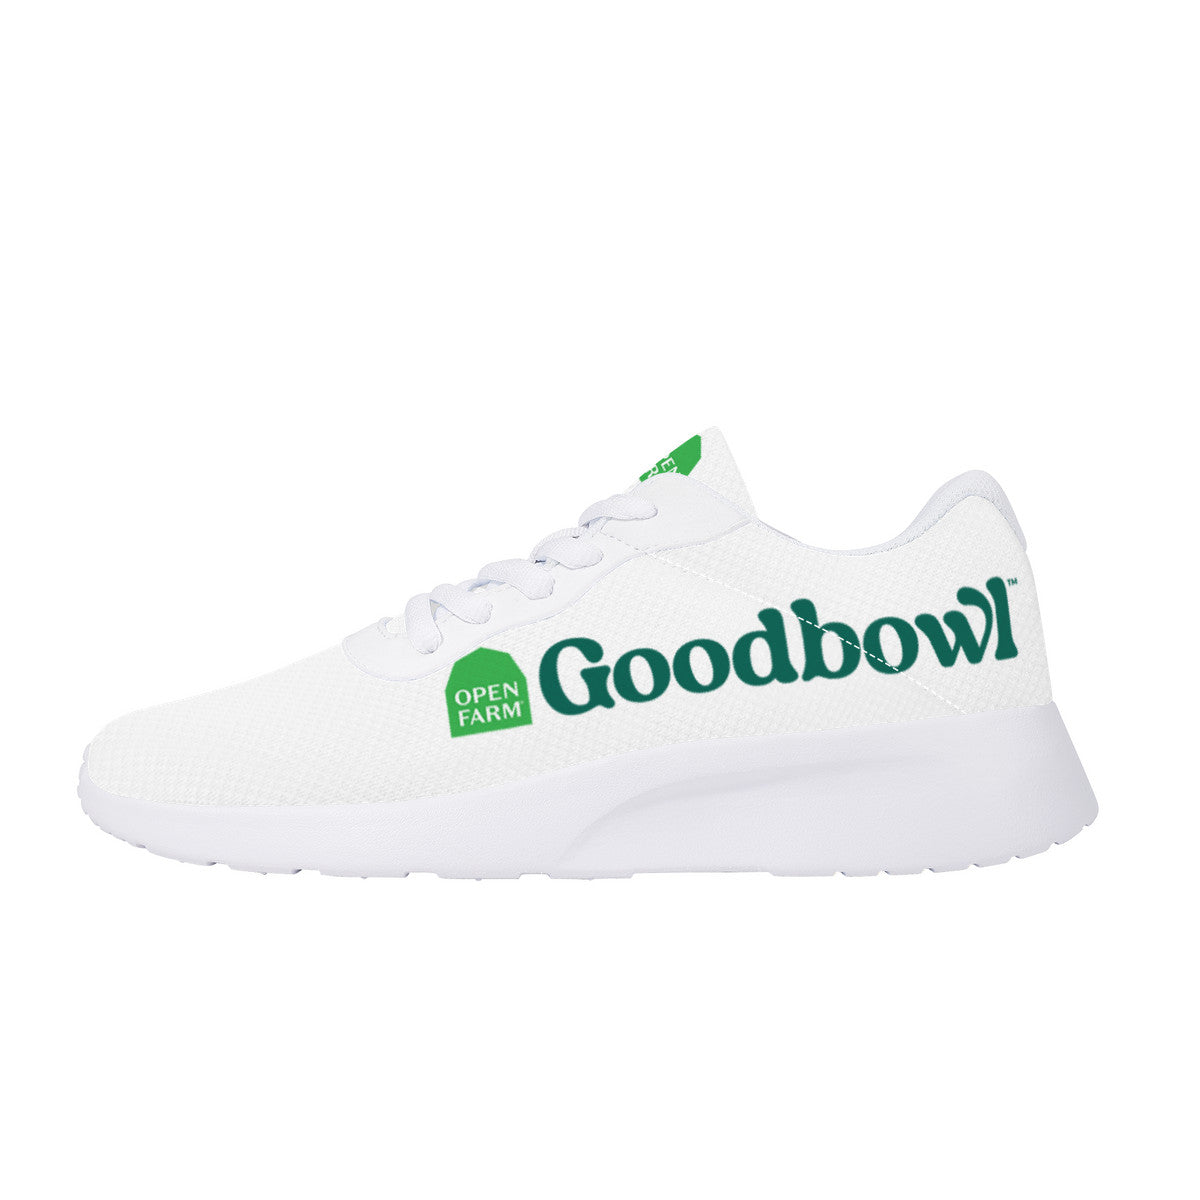 Goodbowl Sneakers | Customized Business Shoes | Shoe Zero